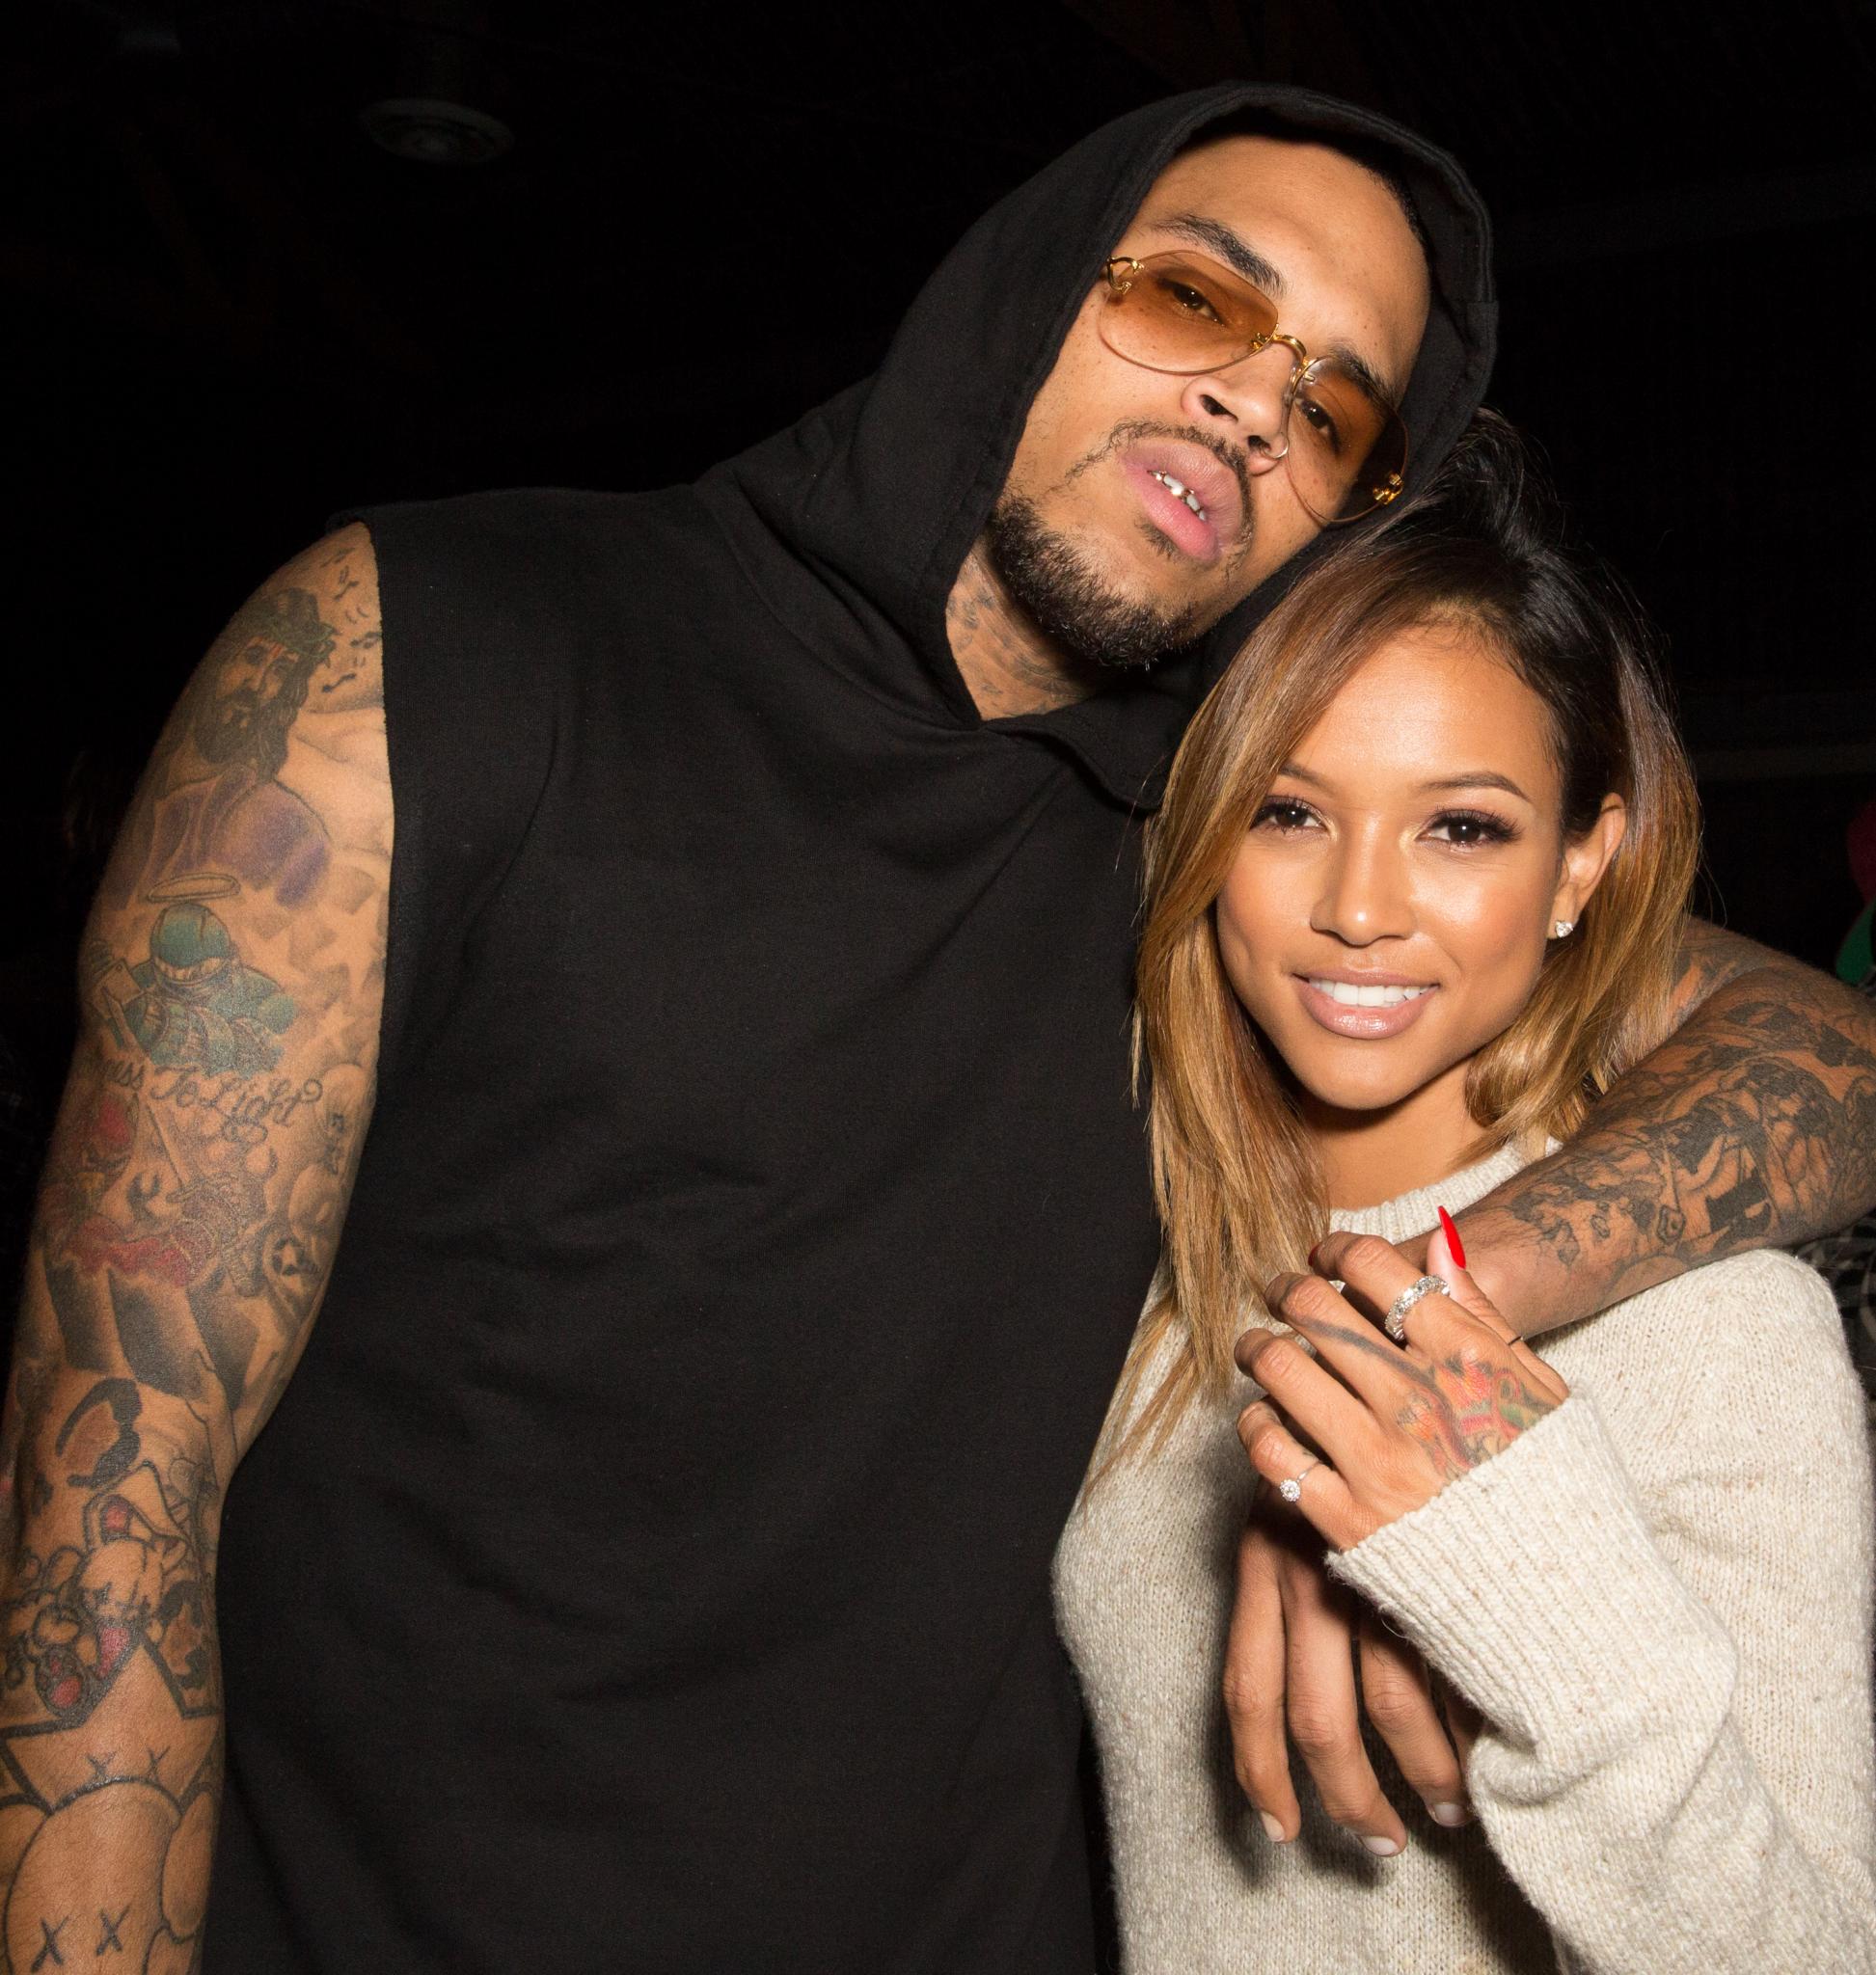 Chris Brown And Karrueche: Here’s Why You Shouldn’t Victim Blame